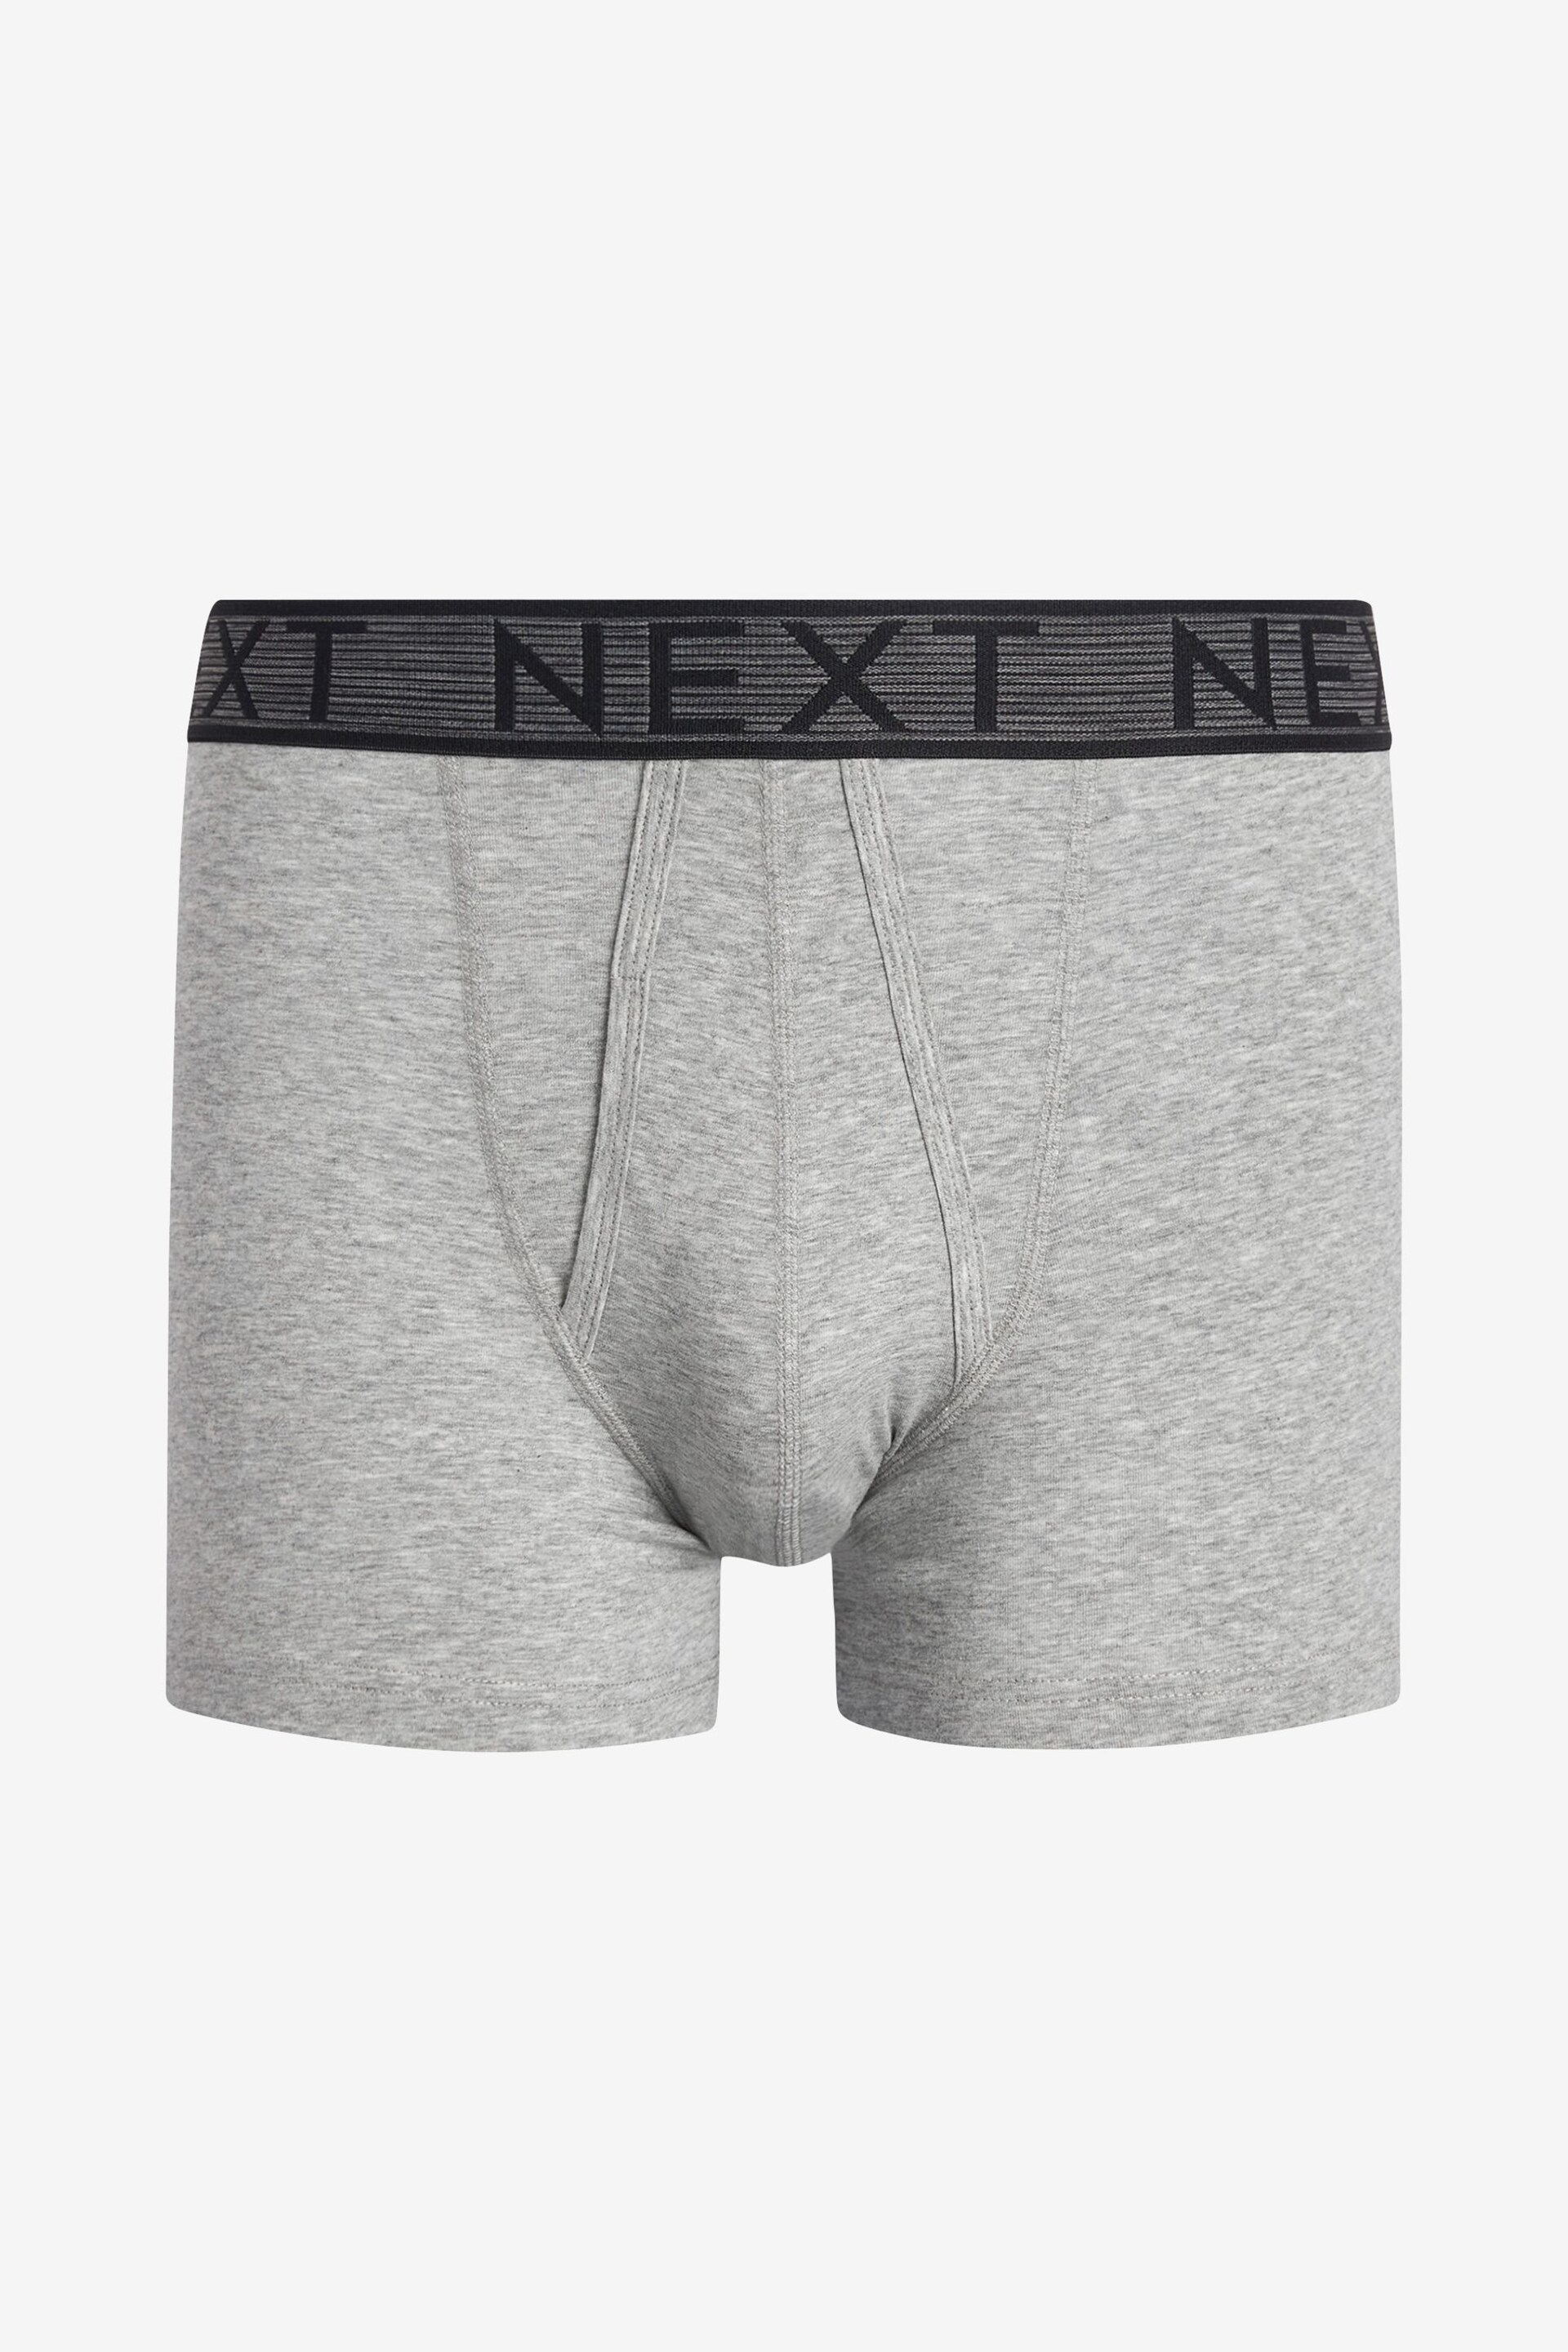 Grey 4 pack A-Front Boxers - Image 2 of 7